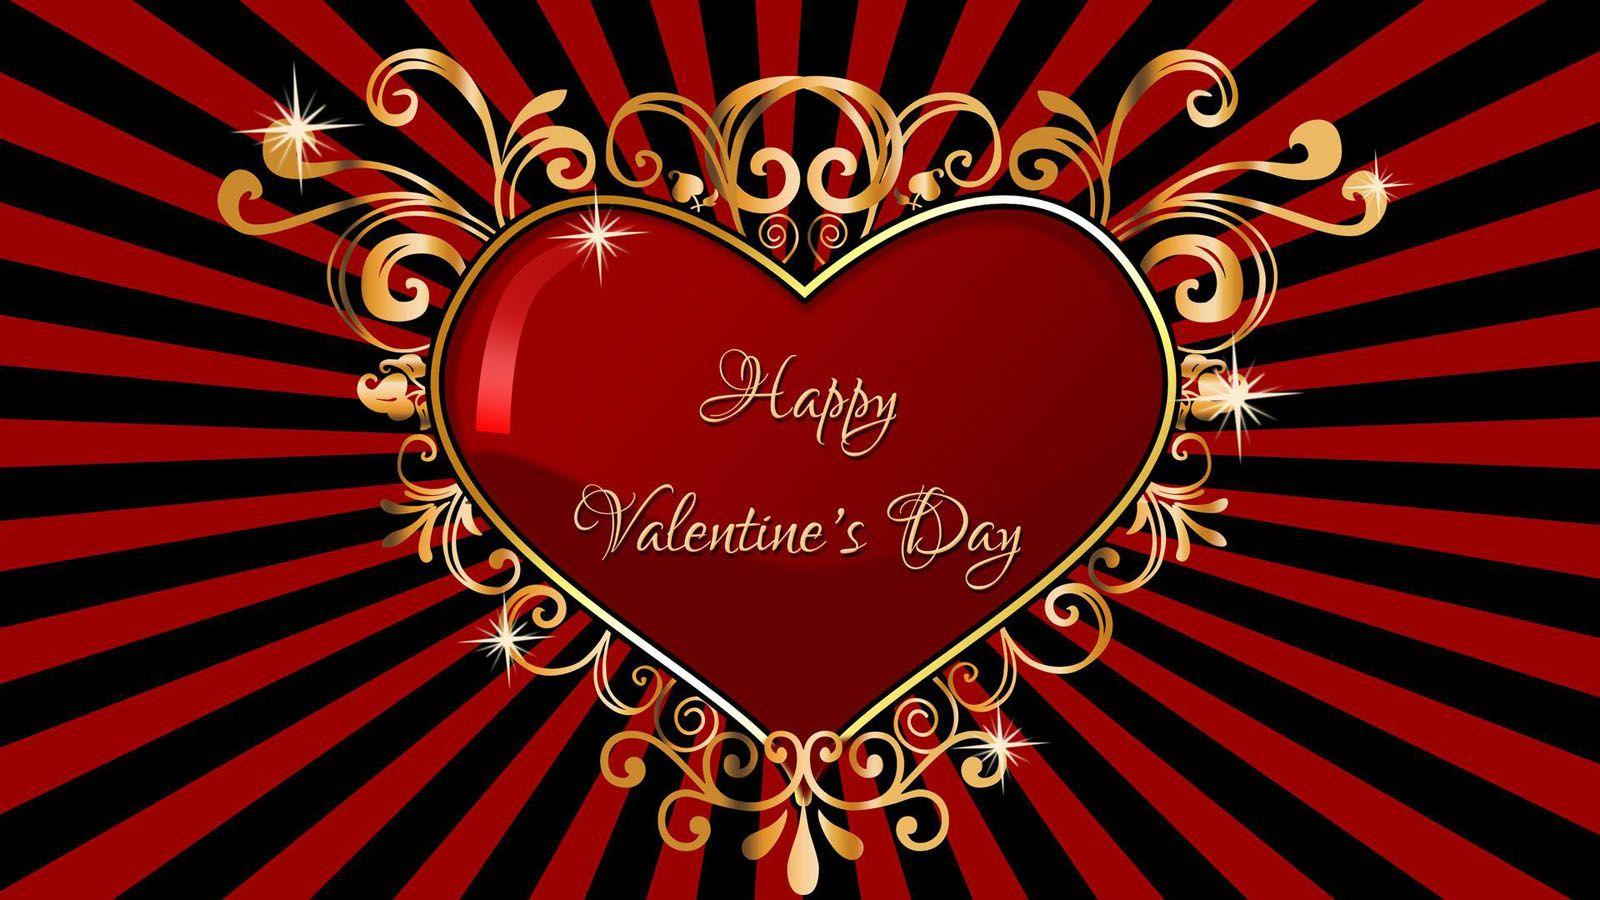 Valentine's Day Hearts Wallpaper Quotes